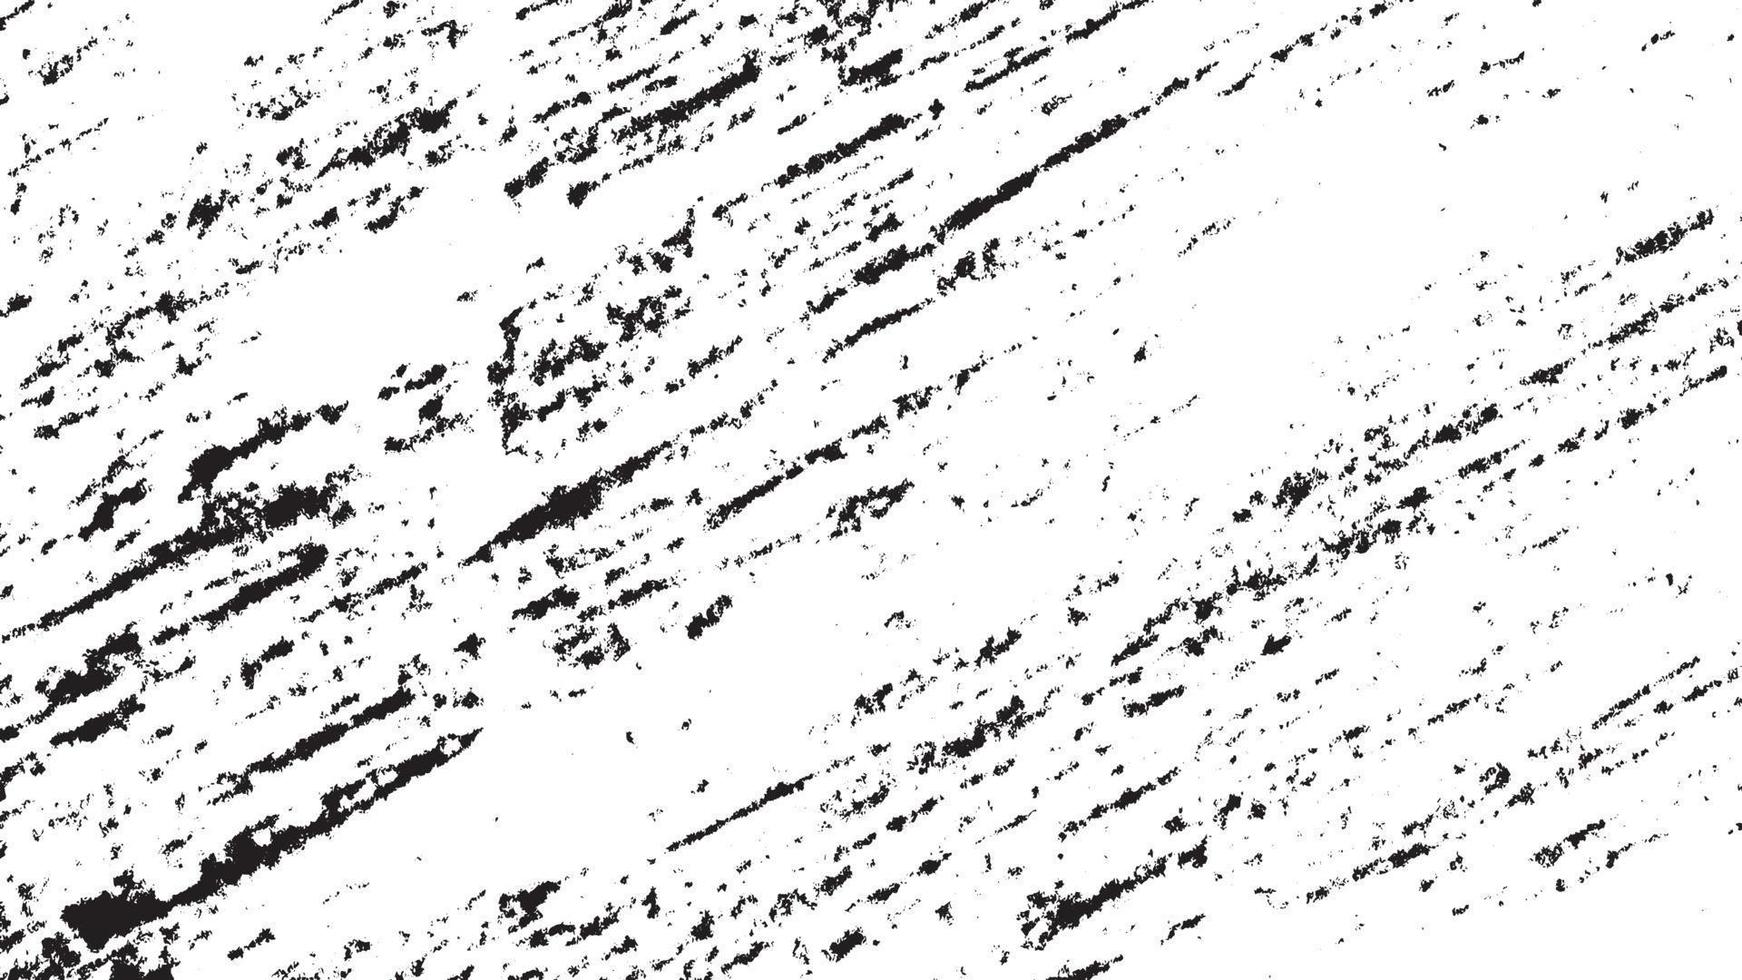 Vector Distressed Dirt Overlay, Retro distressed grunge texture, Grunge background black and white. Texture of chips, cracks, scratches, scuffs, dust, dirt. Old vintage vector pattern.